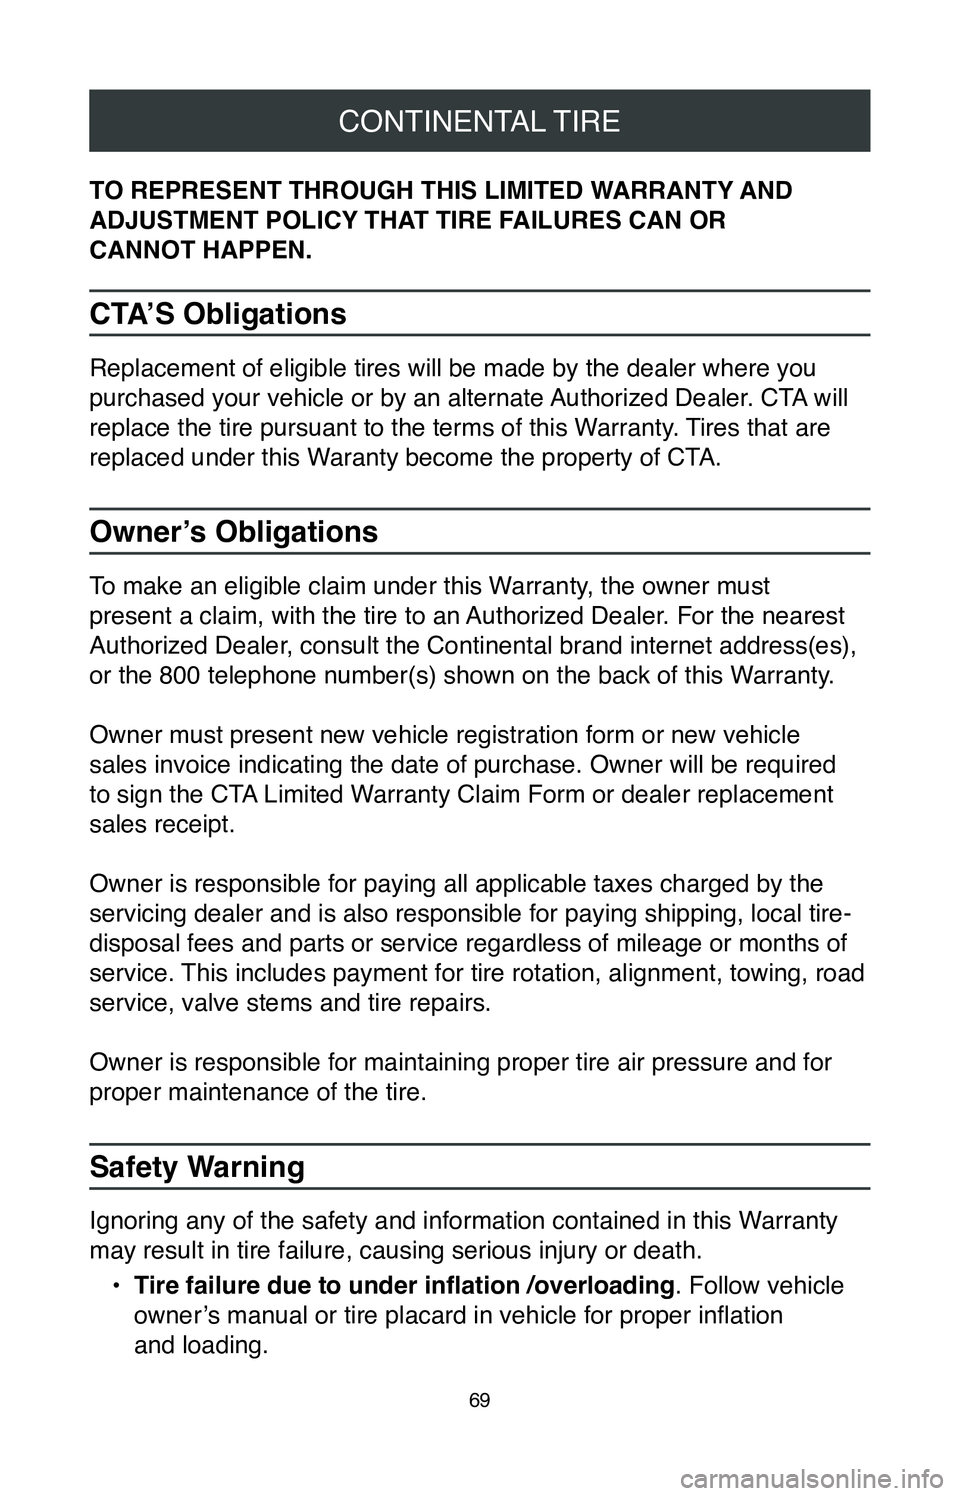 TOYOTA AVALON HYBRID 2020  Warranties & Maintenance Guides (in English) CONTINENTAL TIRE
69
TO REPRESENT THROUGH THIS LIMITED WARRANTY AND 
ADJUSTMENT POLICY THAT TIRE FAILURES CAN OR  
CANNOT HAPPEN.
CTA’S Obligations
Replacement of eligible tires will be made by the d